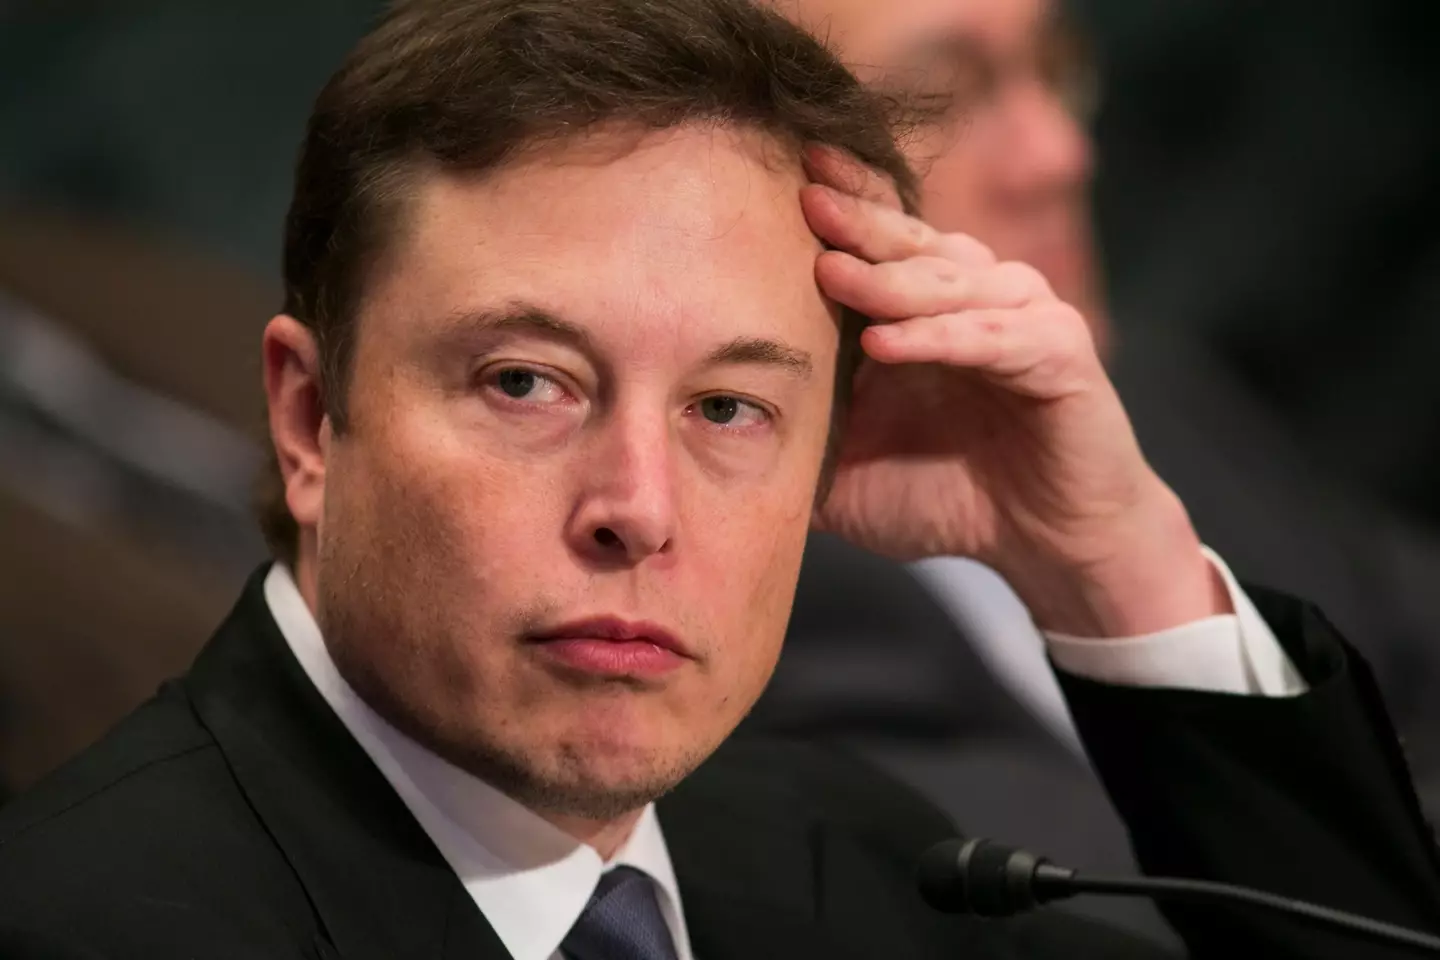 Elon Musk’s neurotechnology company, Neuralink, has been reported to be under investigation.